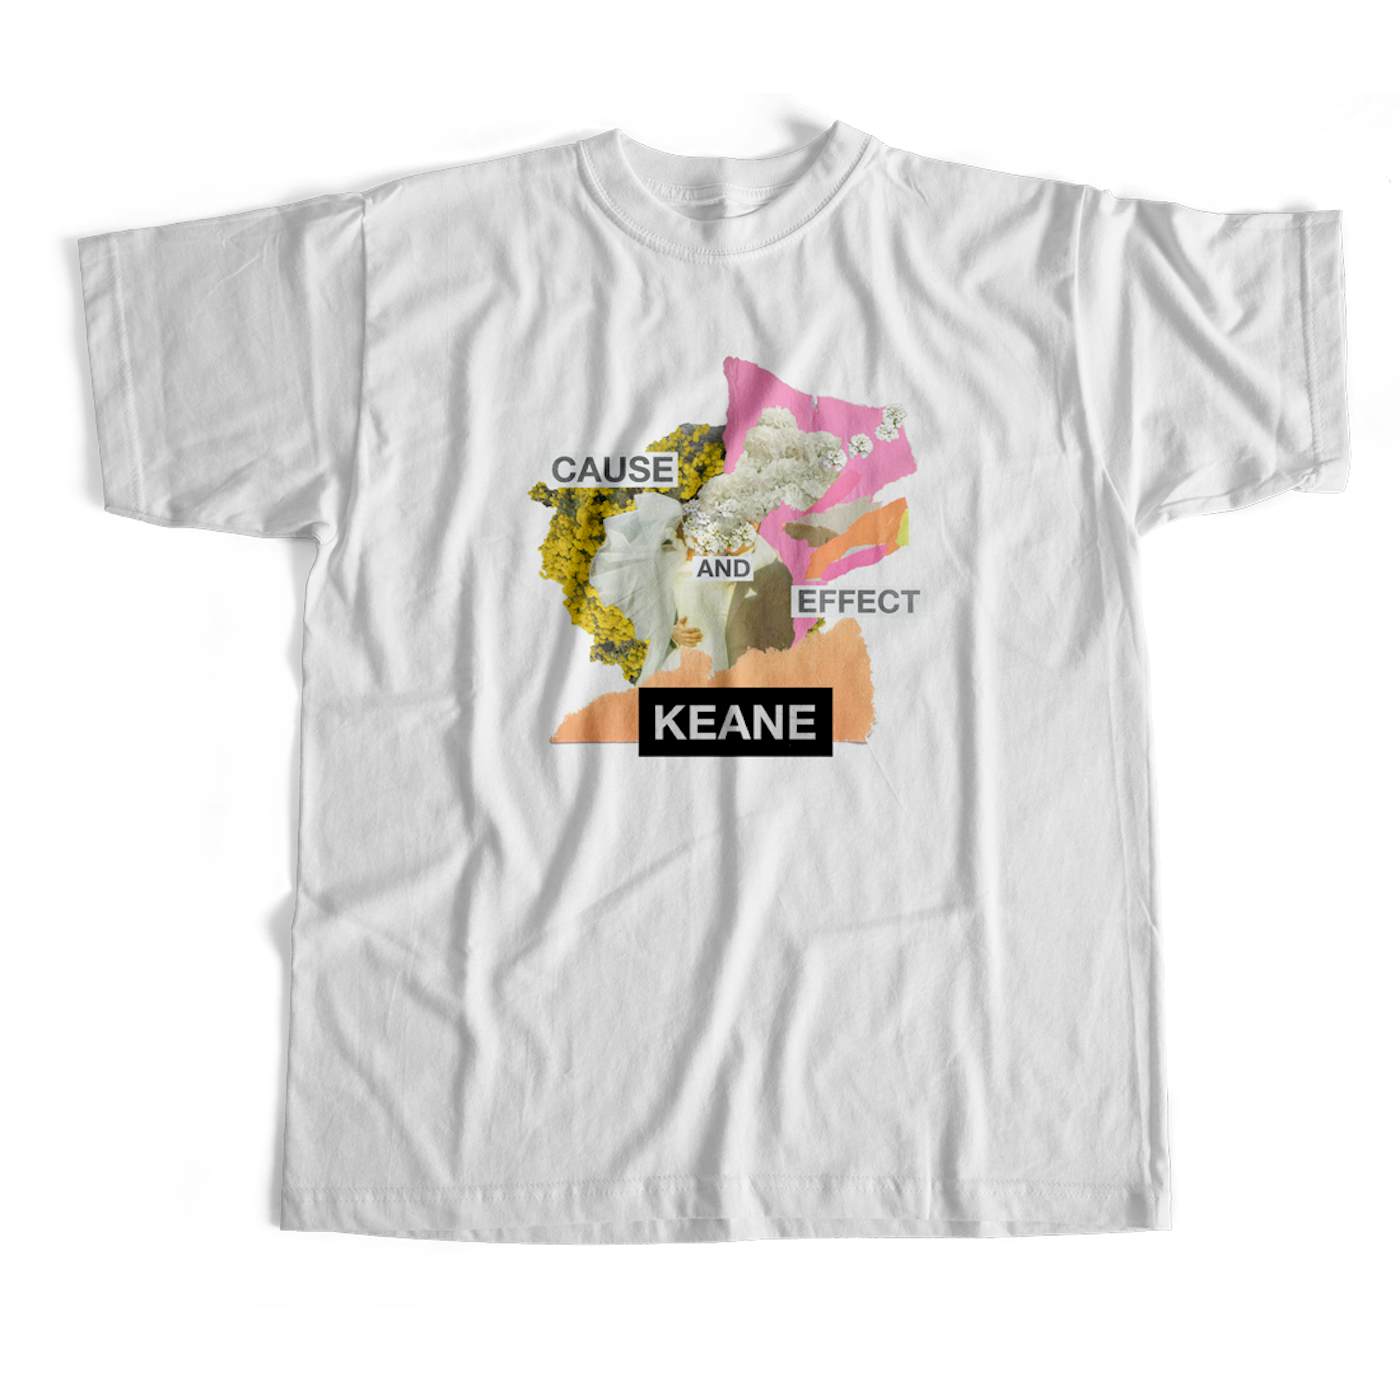 Keane Cause and Effect T-Shirt + Deluxe Digital Album